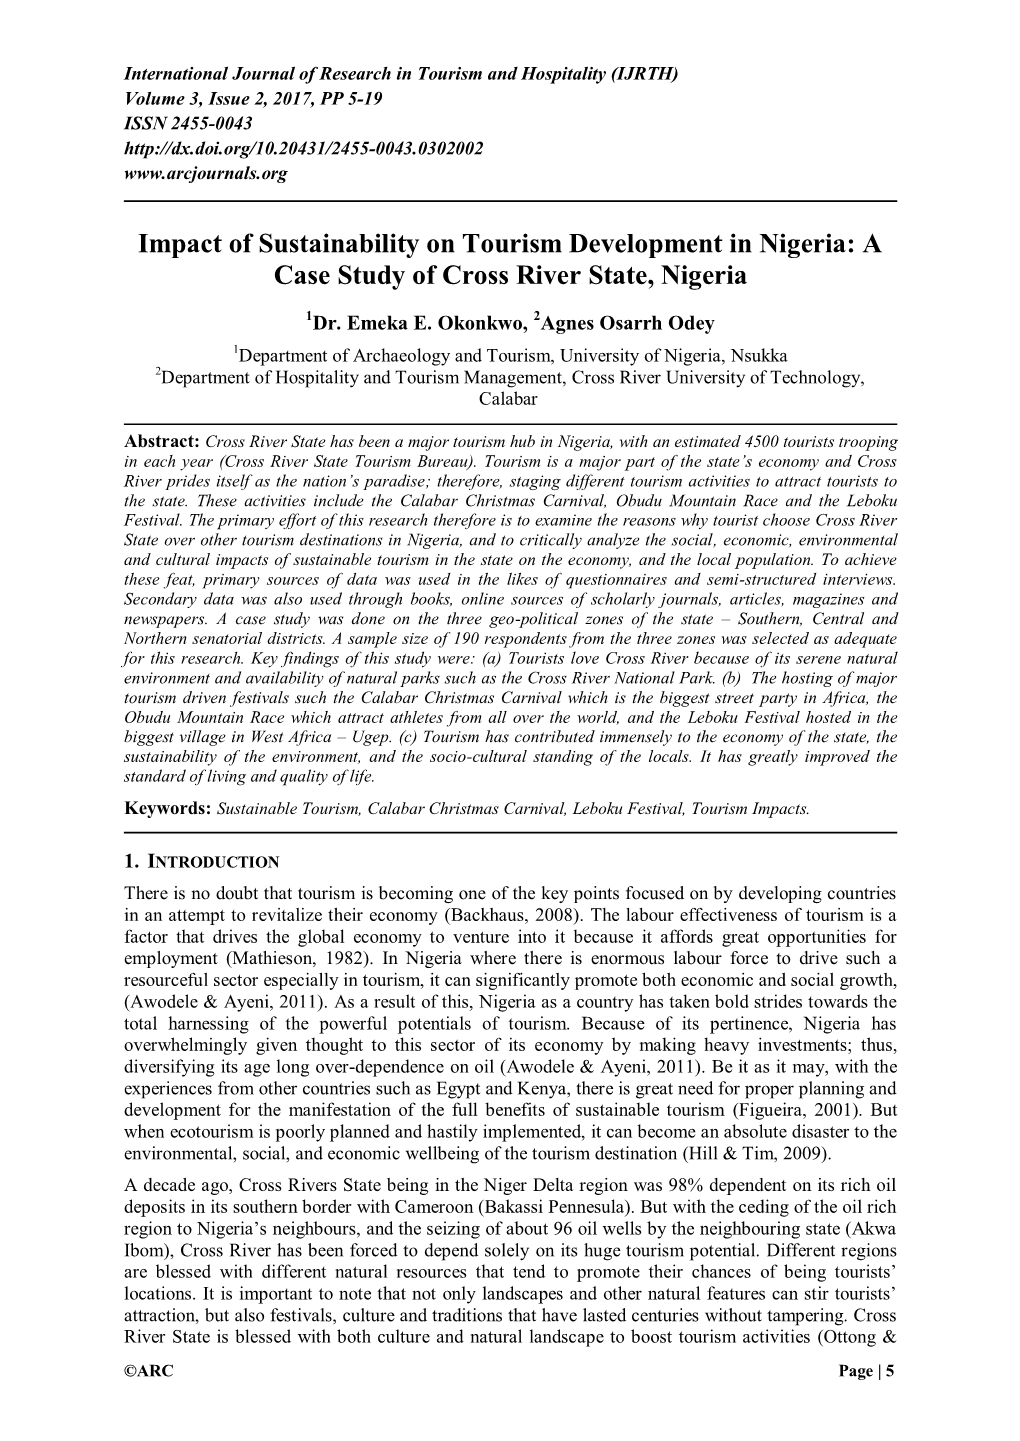 Impact of Sustainability on Tourism Development in Nigeria: a Case Study of Cross River State, Nigeria